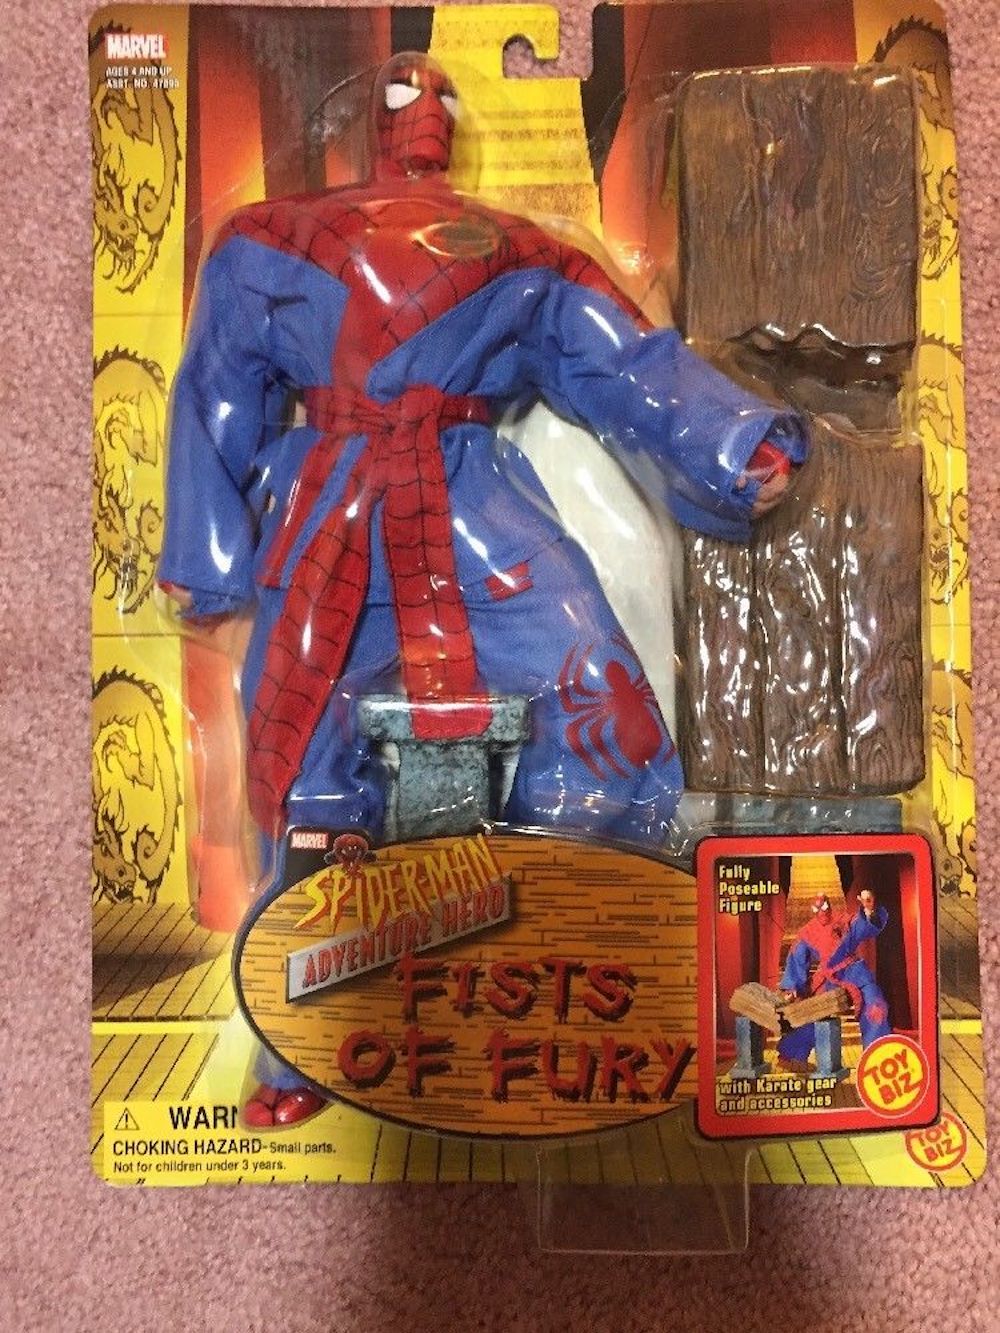 fists of fury spider-man